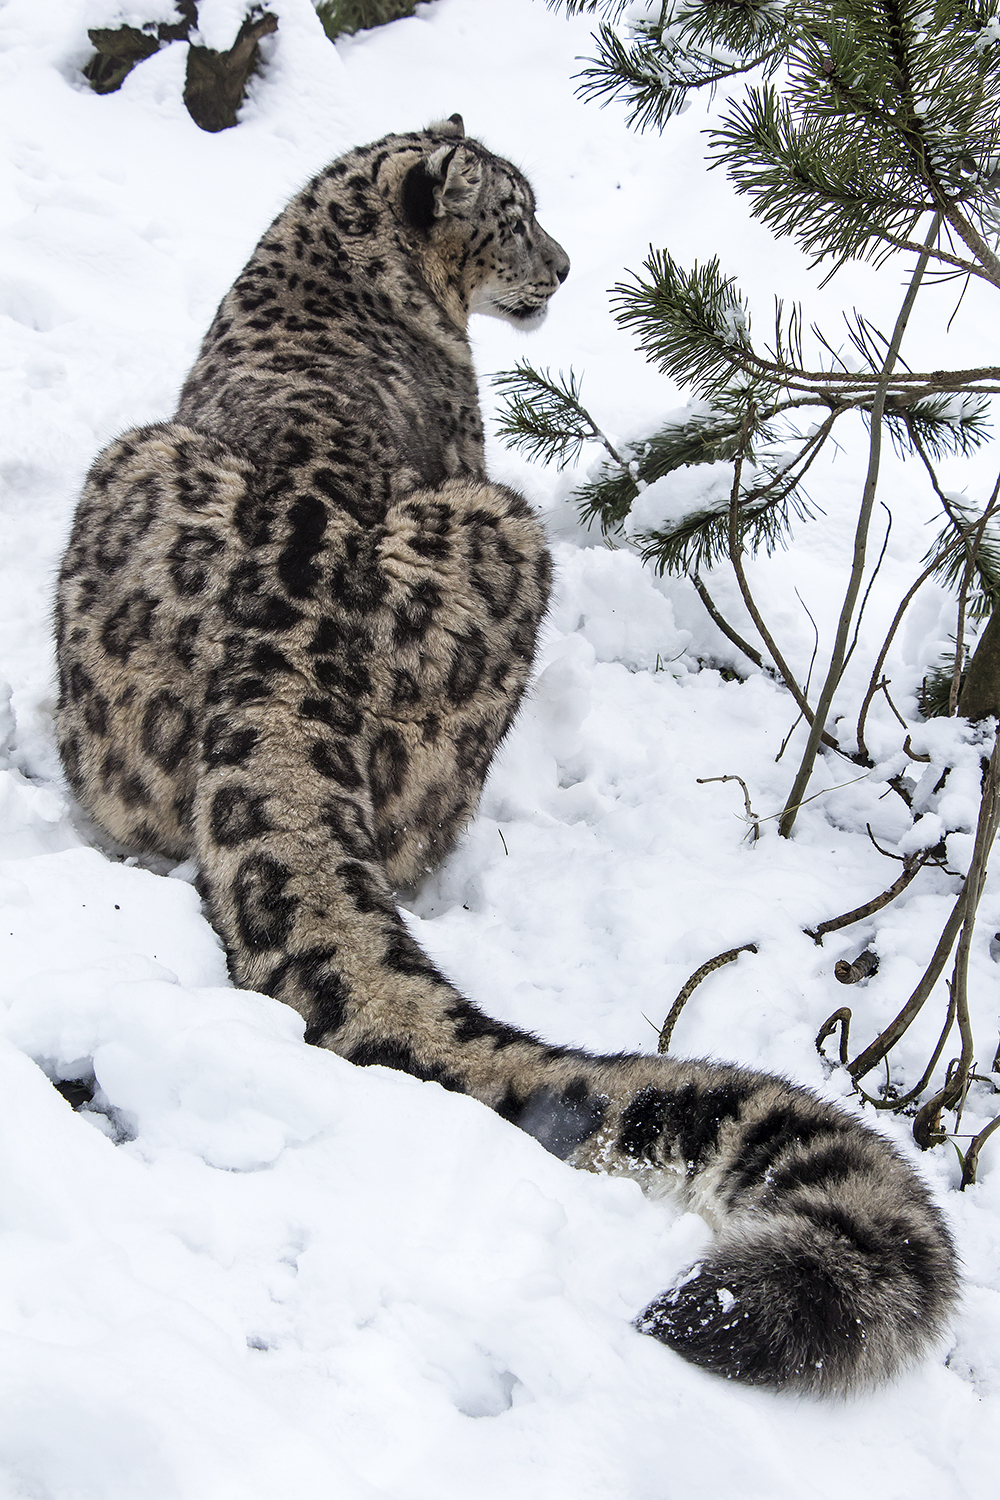 All tails - Animals, Snow Leopard, Nature, Tail, Snow, The photo